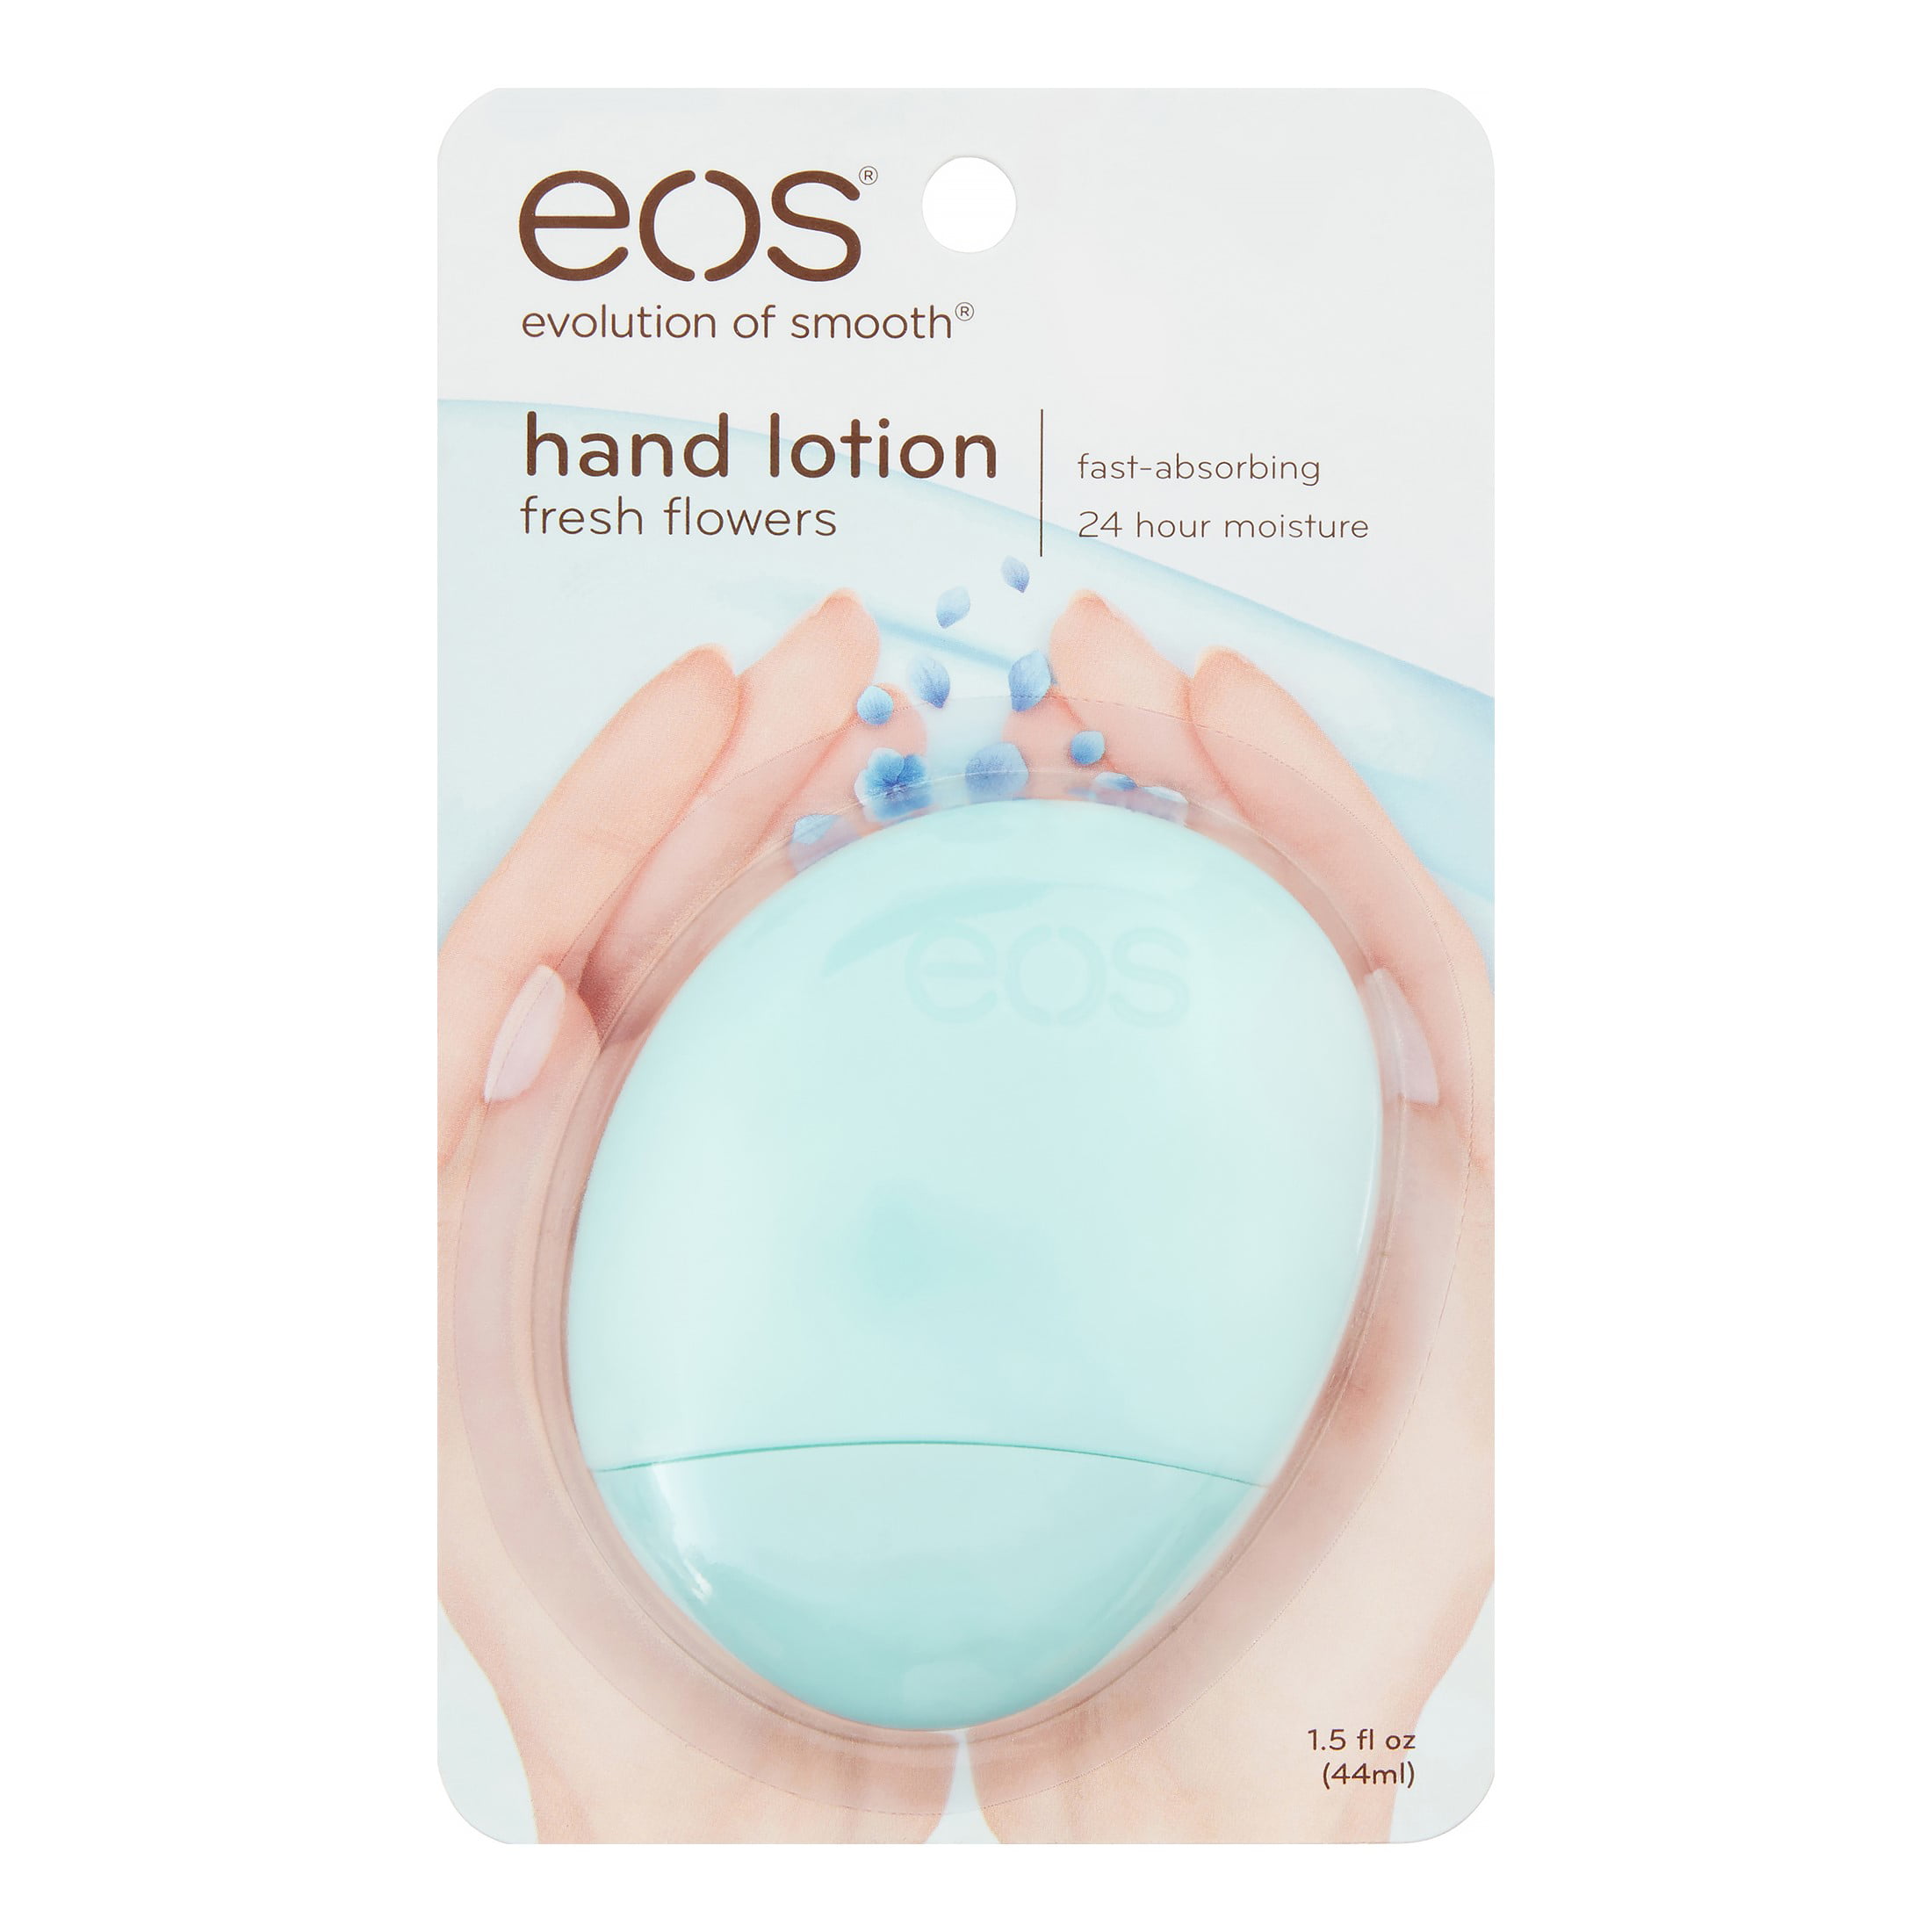 eos hand lotion travel size